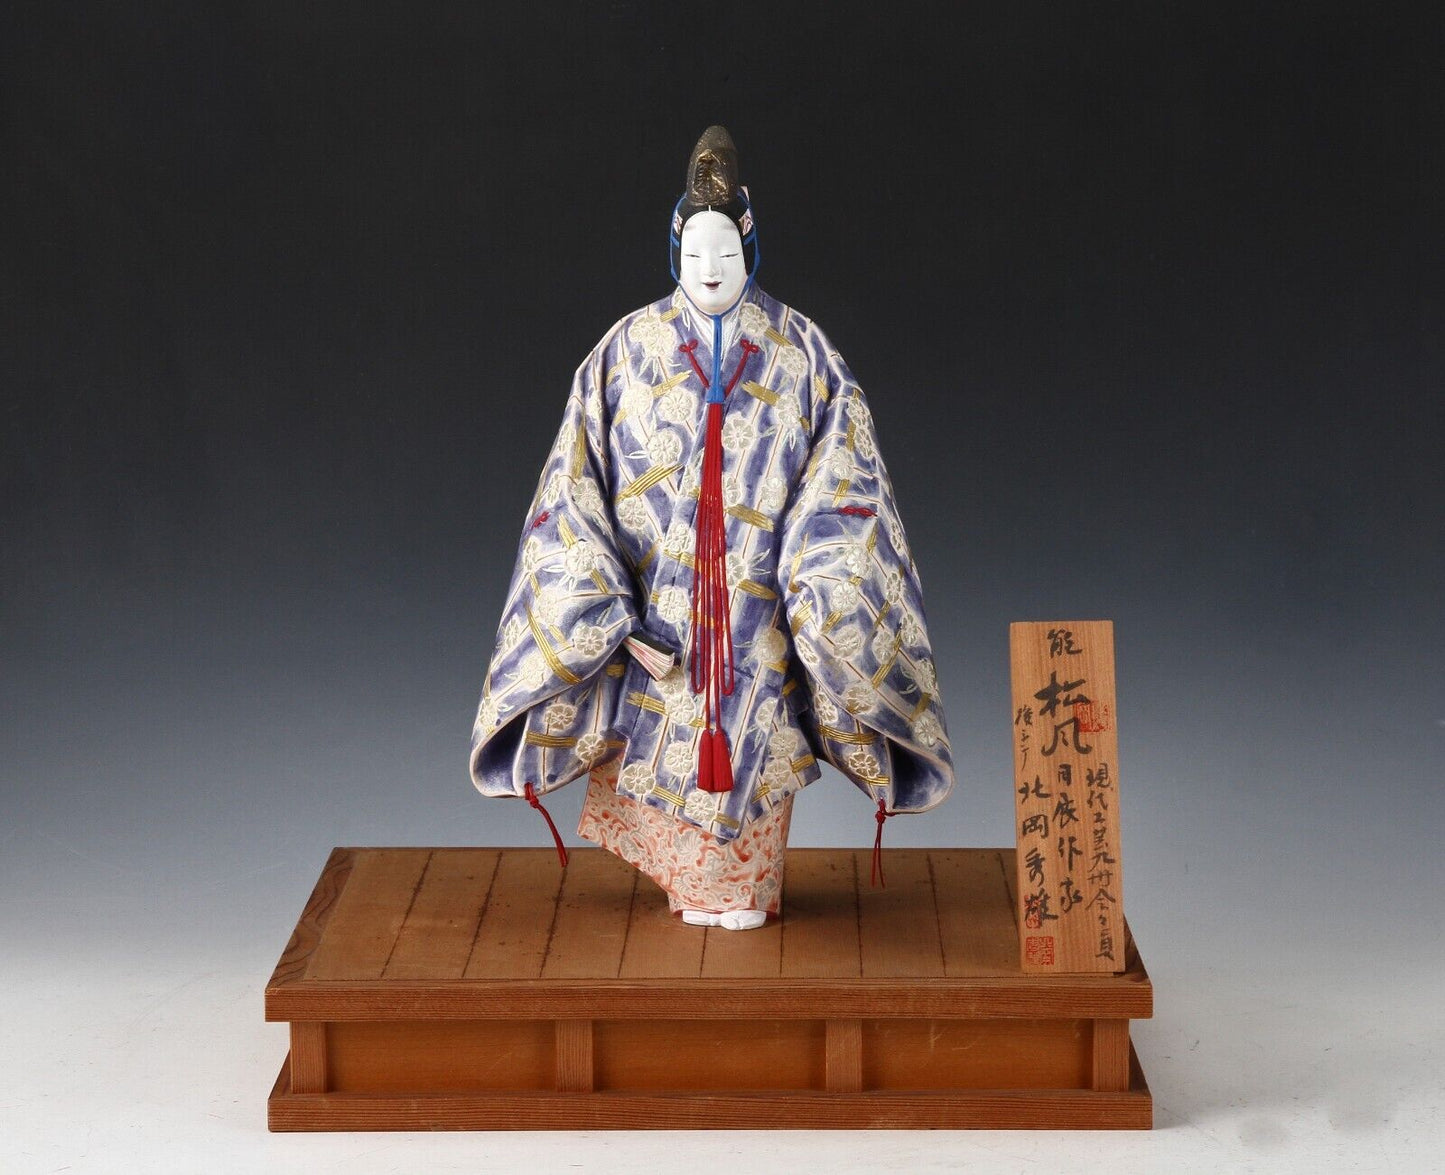 Authentic Vintage Japanese Ceramic Doll in Traditional Clothing Collectible Asian Art.